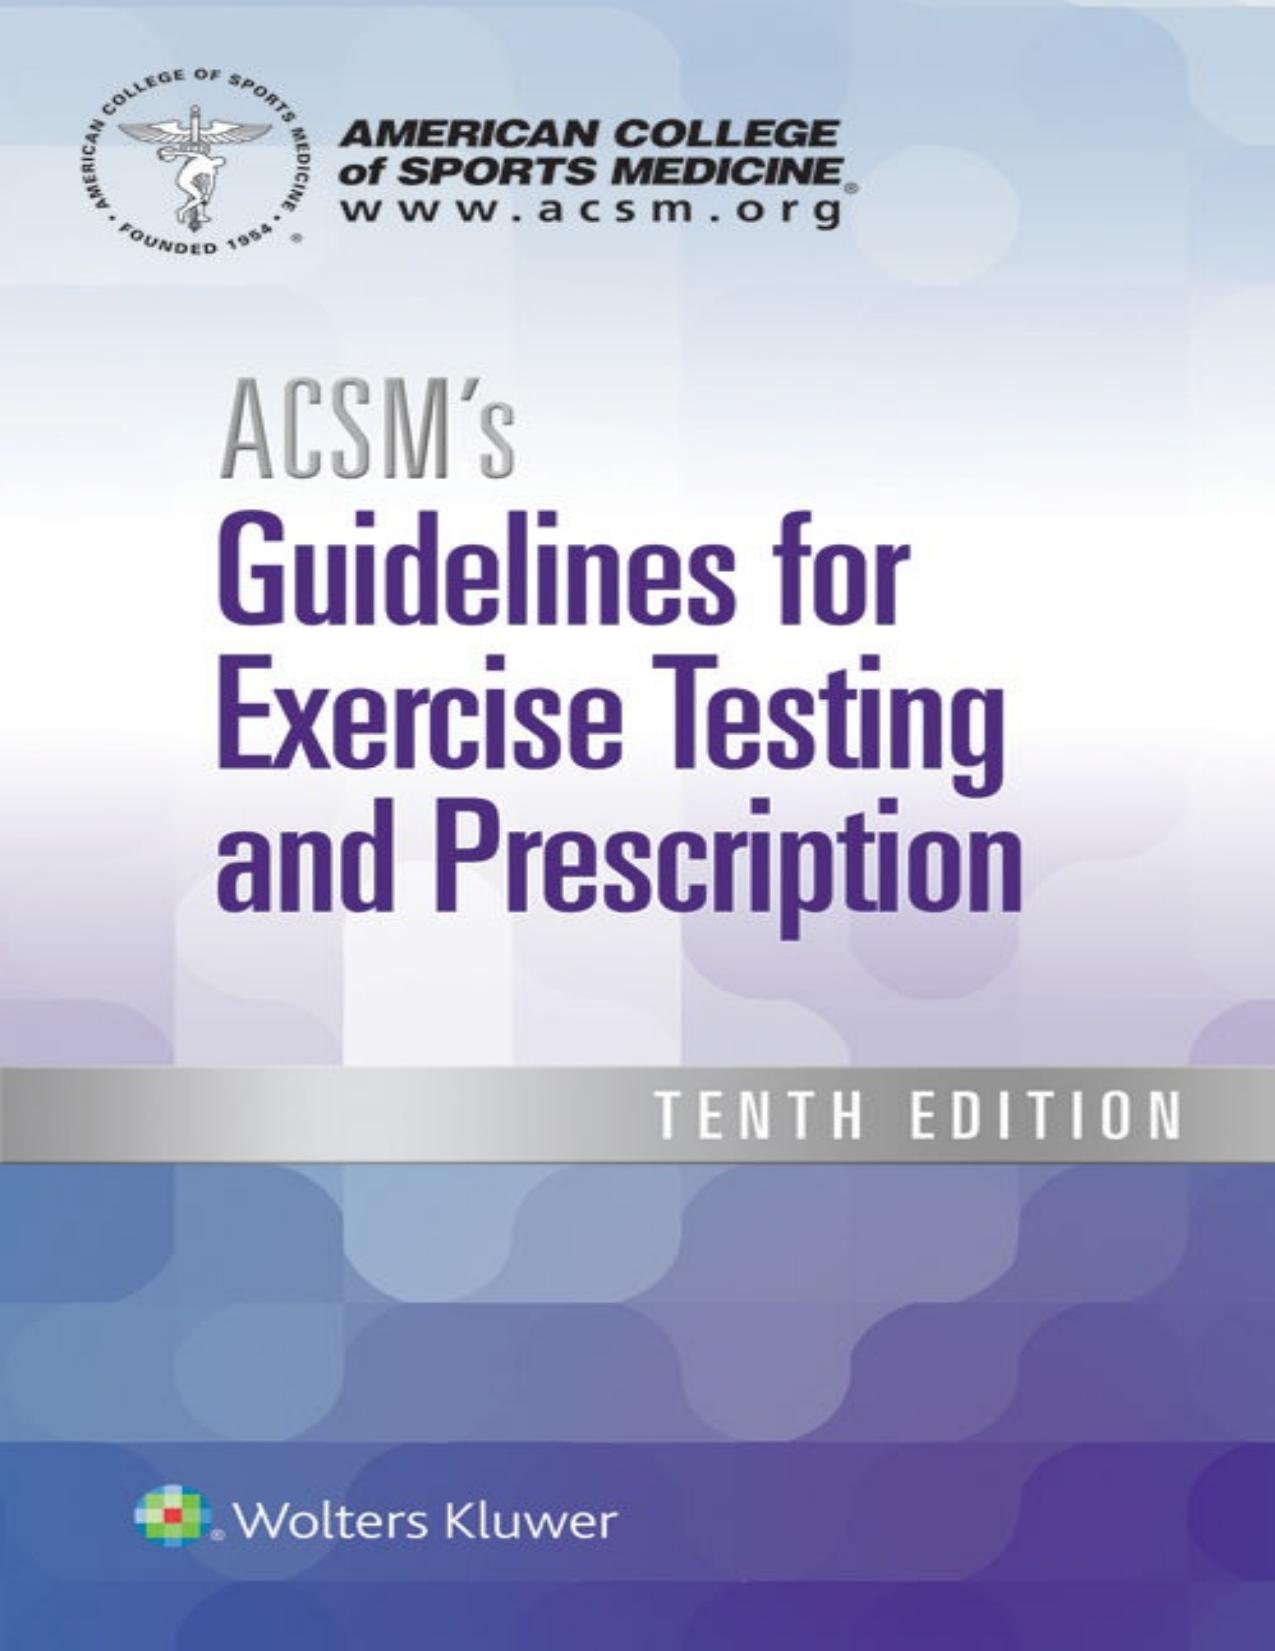 ACSM’s Guidelines for Exercise Testing and Prescription Tenth Edition